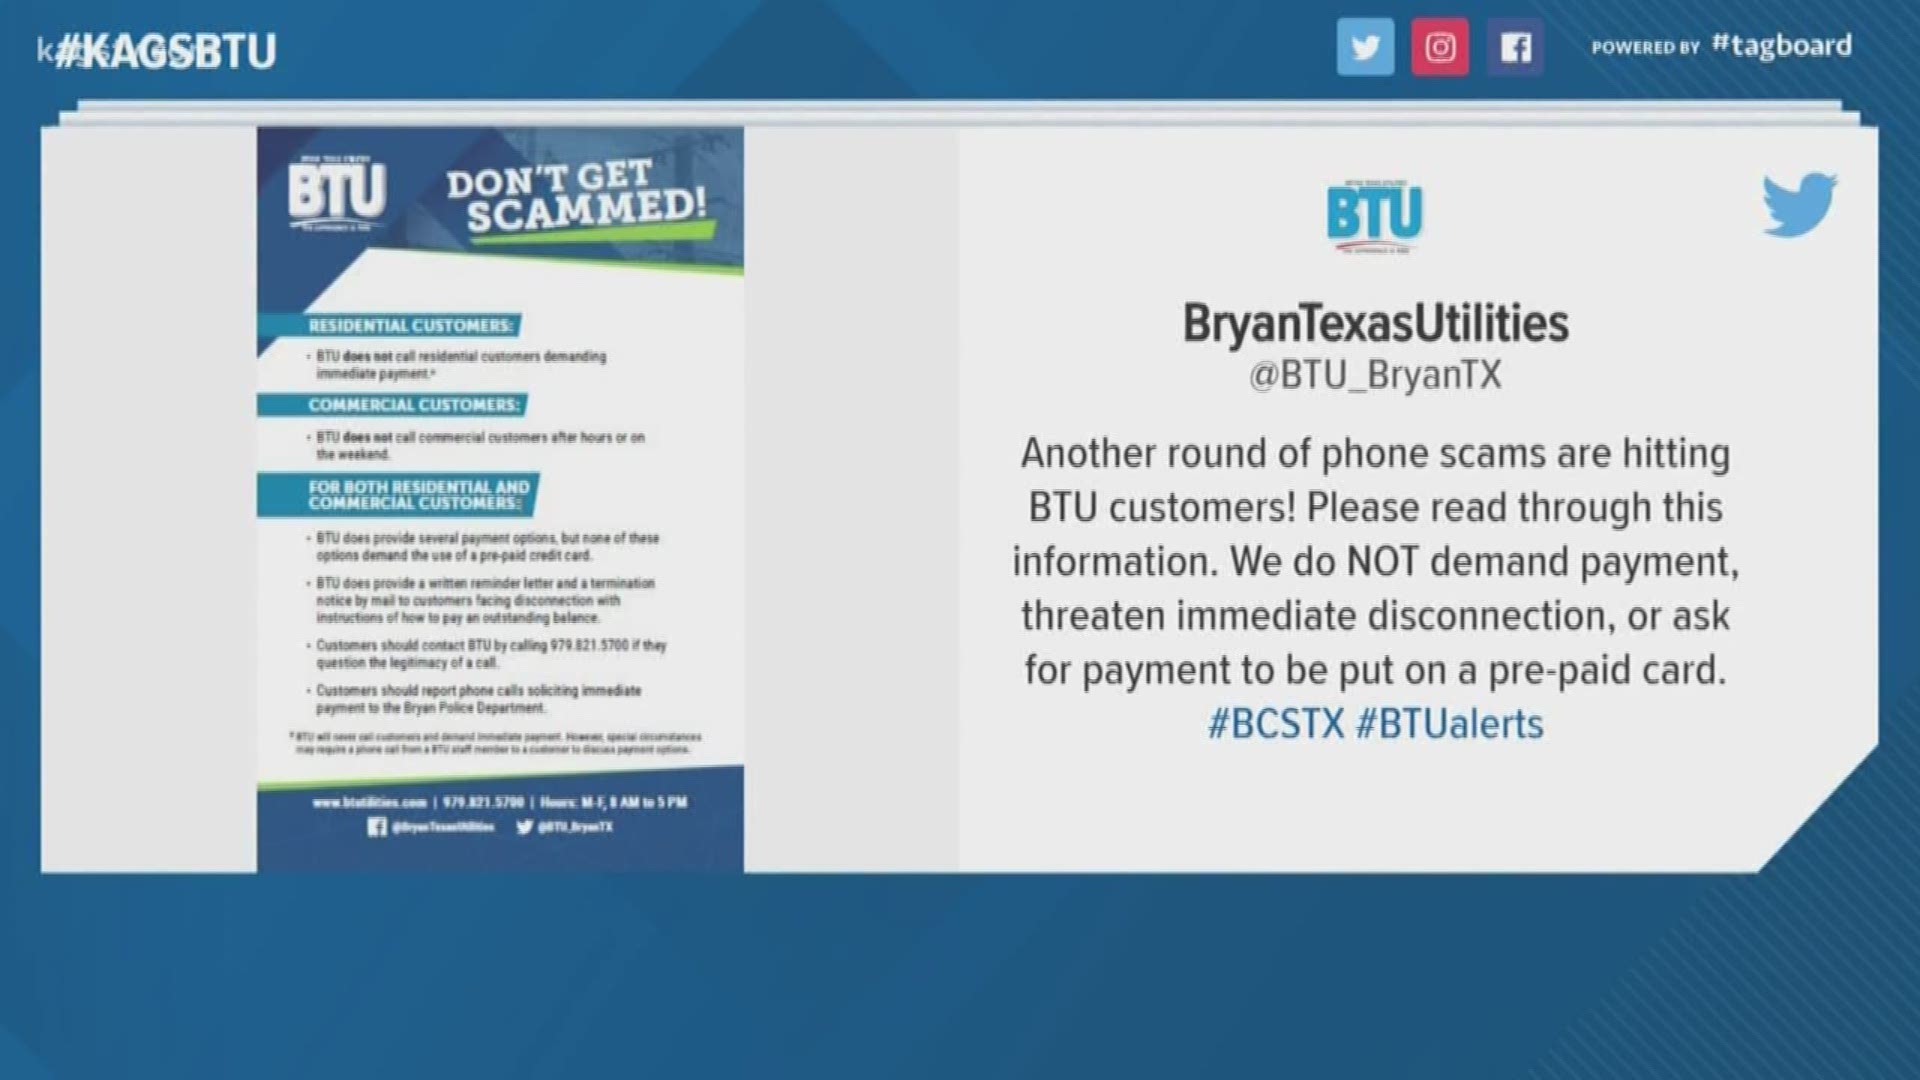 The scammer claims to be from BTU and demands bill payments over the phone or their service will be disconnected.